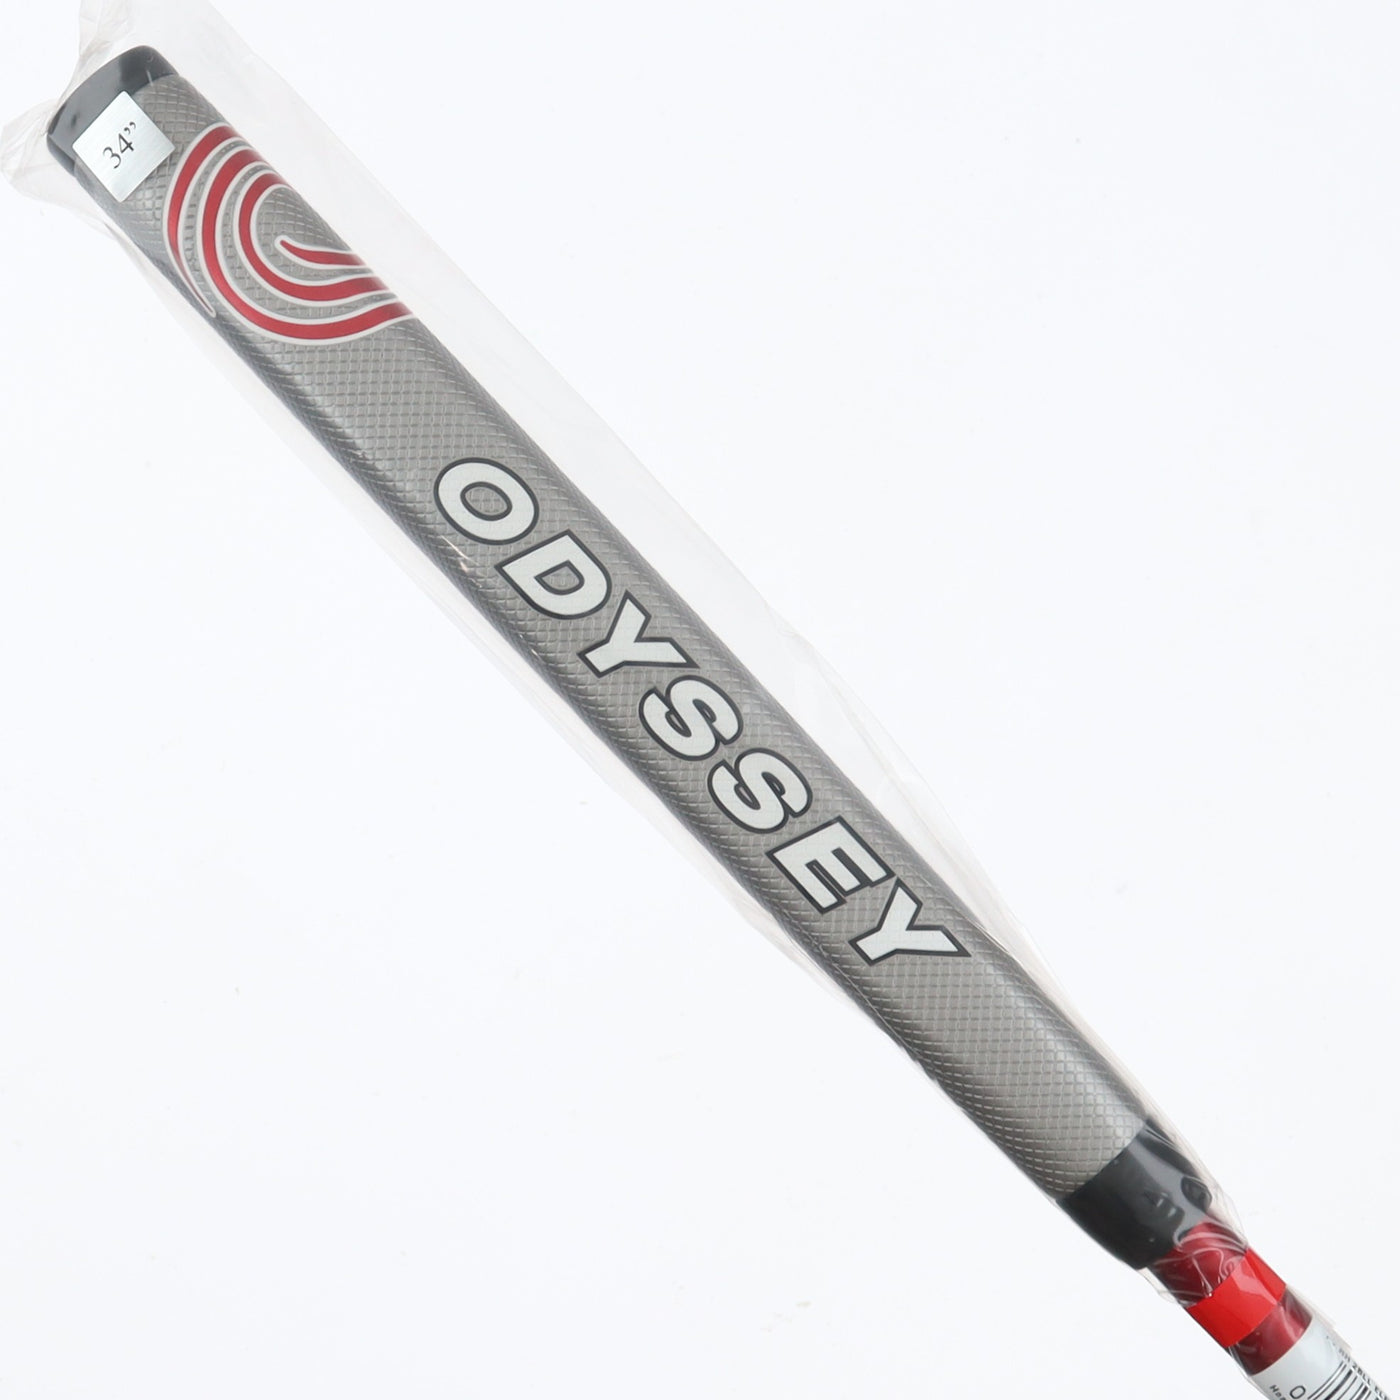 Odyssey Putter Open Box 2-BALL ELEVEN TOUR LINED 34 inch